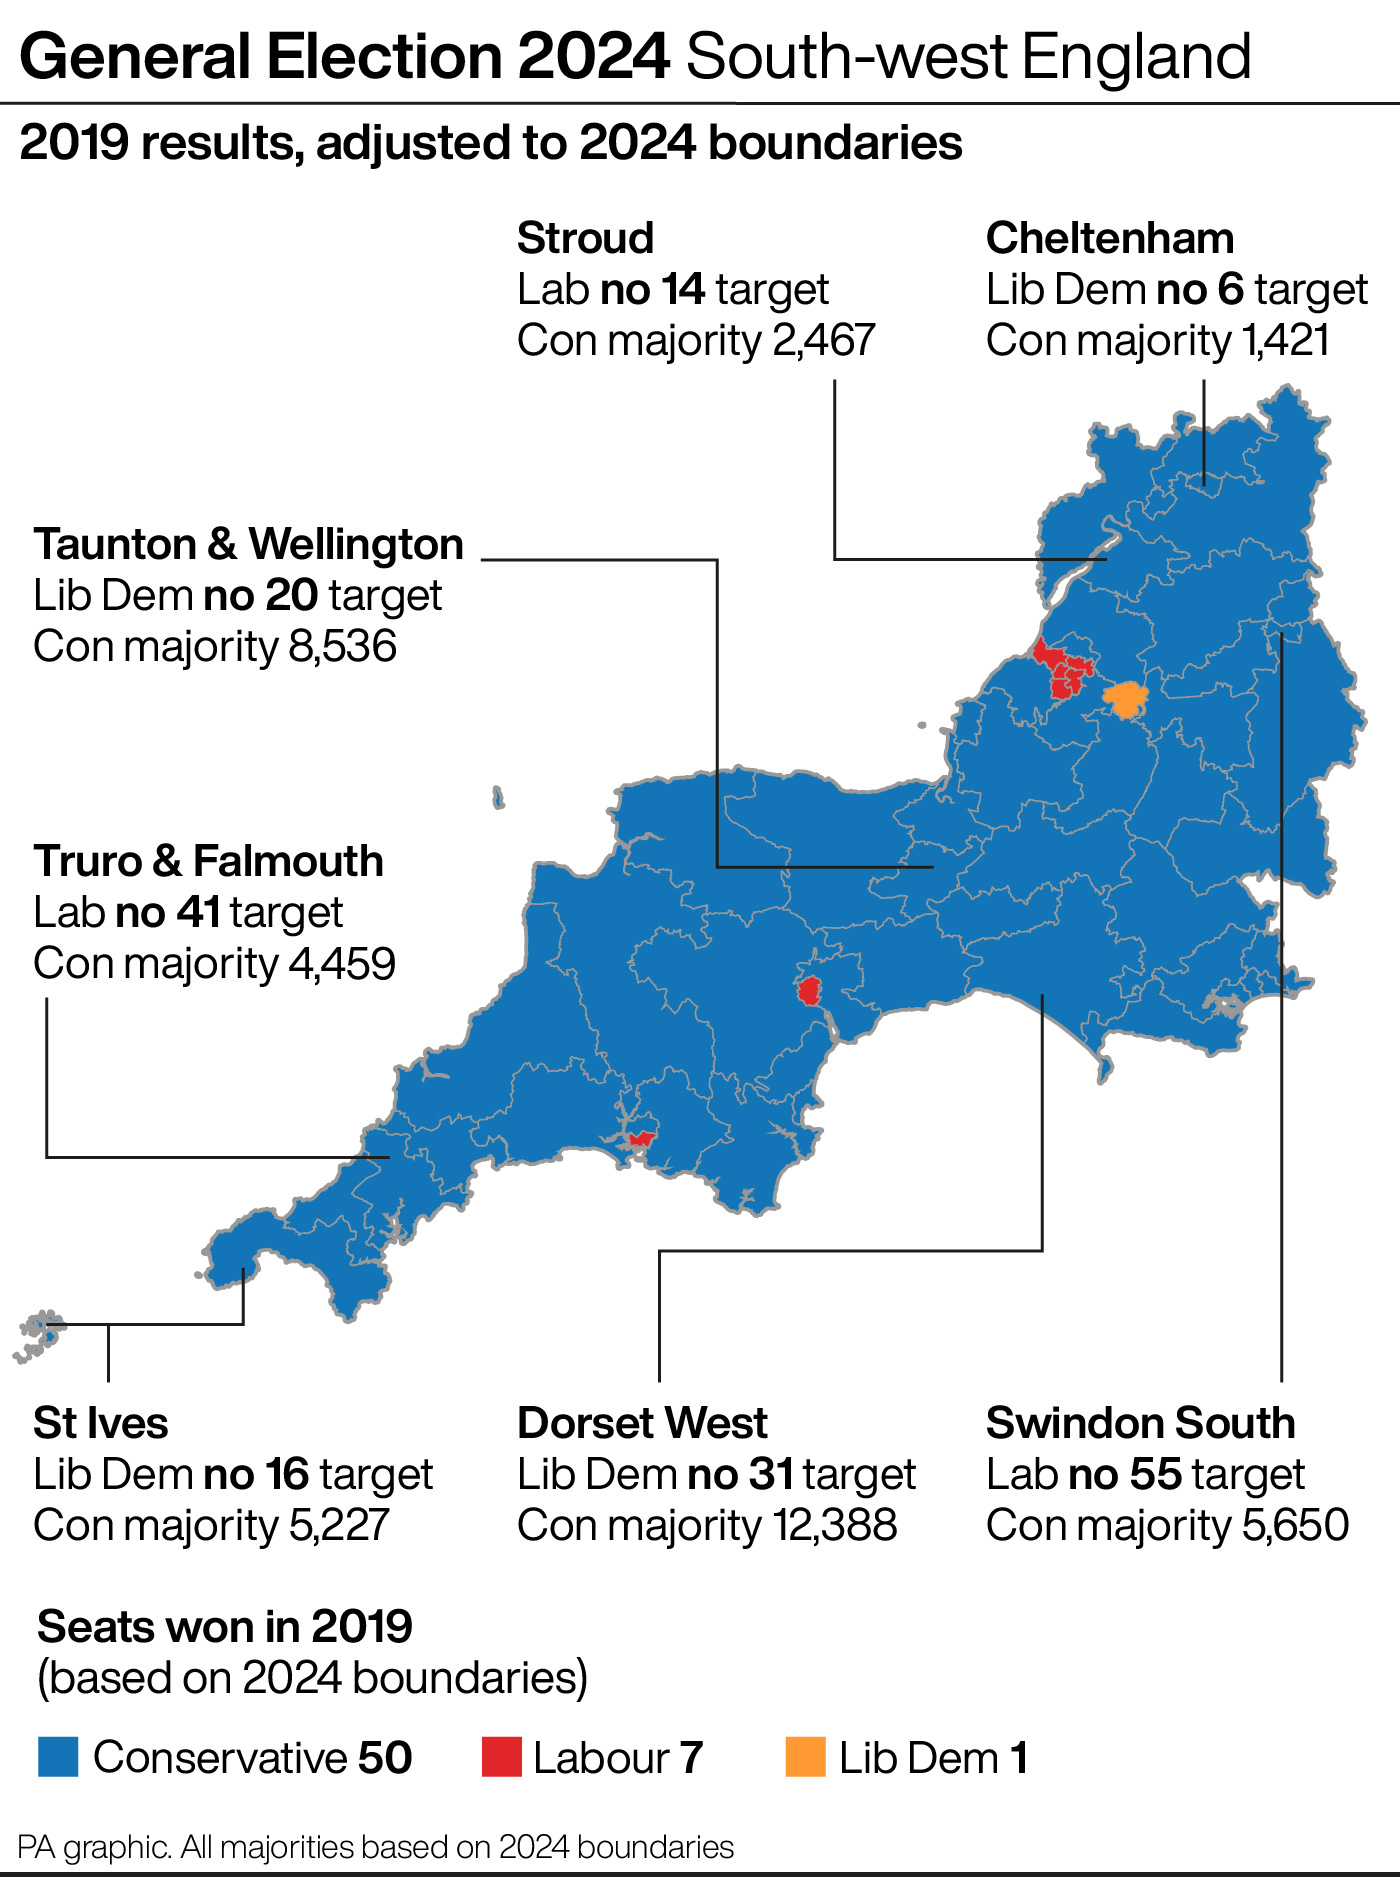 A map showing key battleground seats in south-west England at the General Election